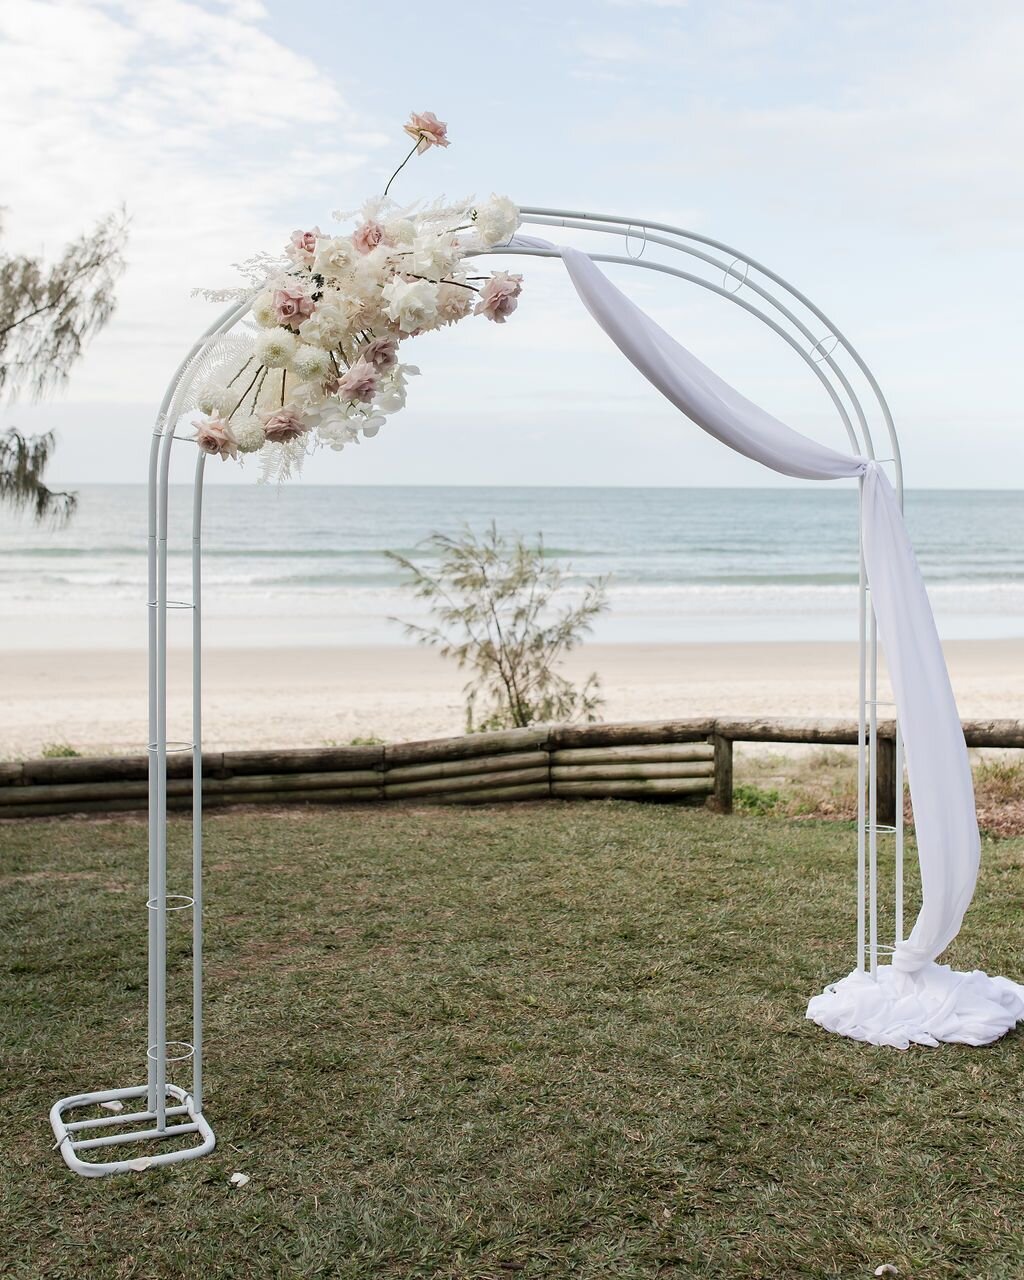 Michelle &amp; Gavin had a beautiful beachfront ceremony, featuring a stunning white arch abor with a muslin swag.

🤍 Wedding Details: 🤍

Planner/Stylist: @splashevents 
Photography: @katerobinson.co 
Venue: @sailsbeachnoosa 
Florals: @mapleflowers